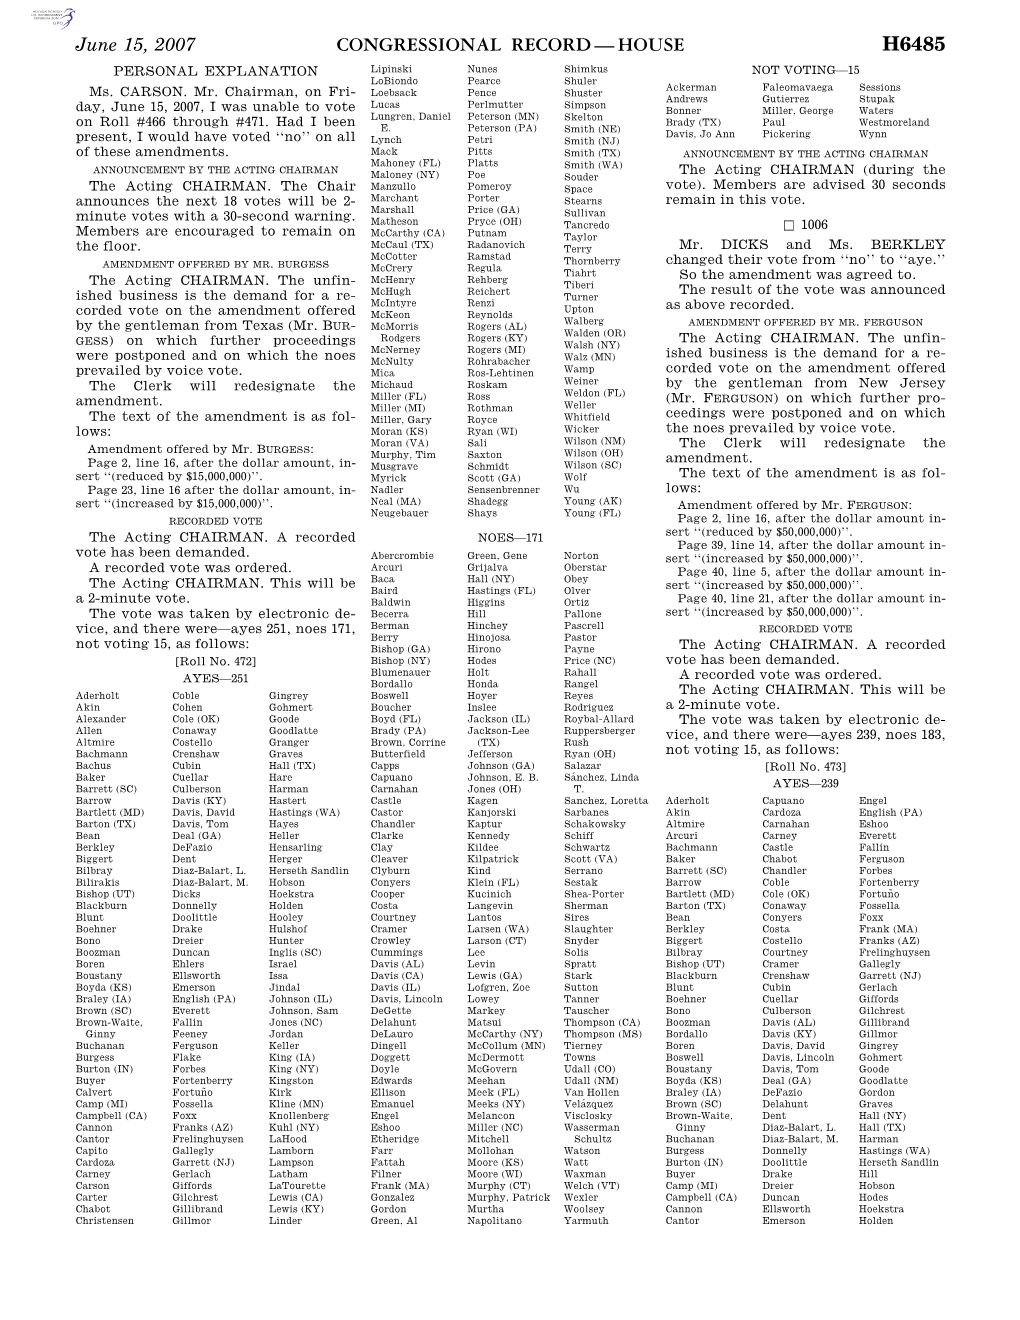 Congressional Record—House H6485